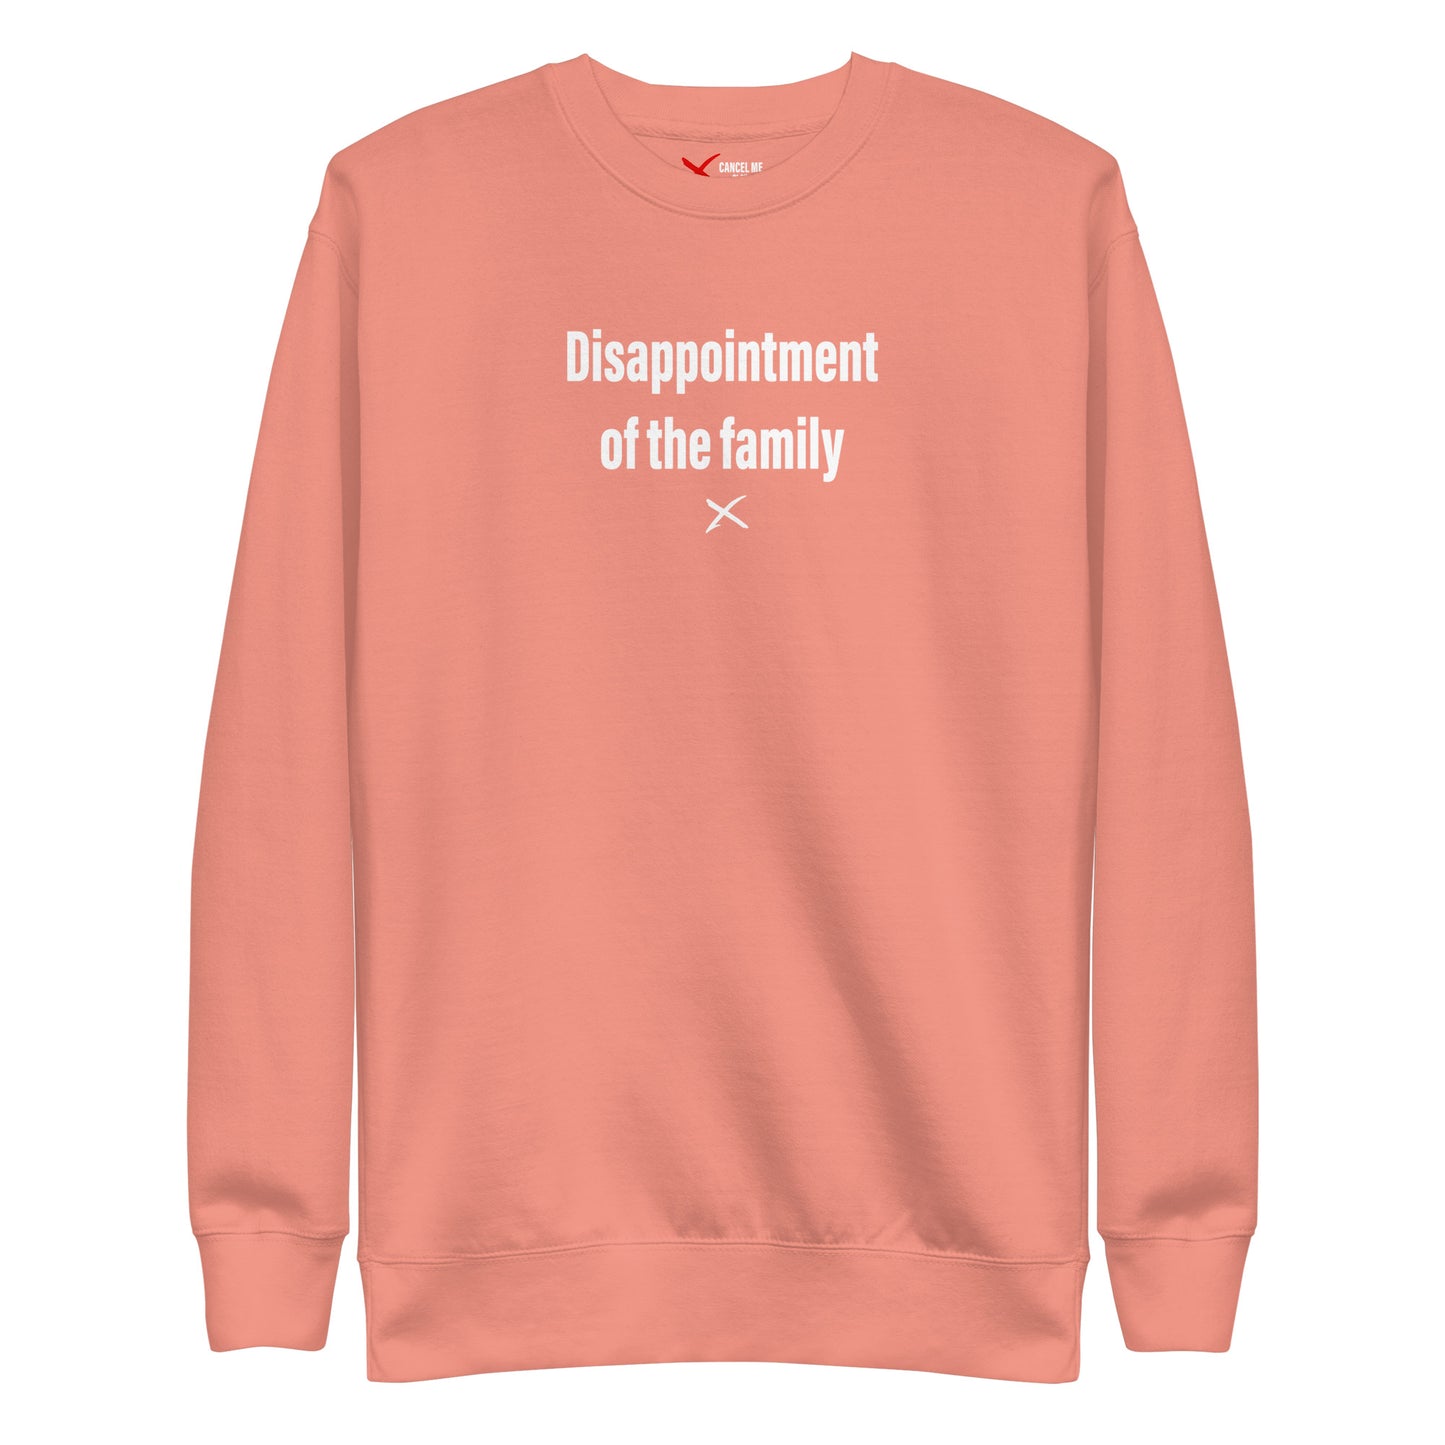 Disappointment of the family - Sweatshirt